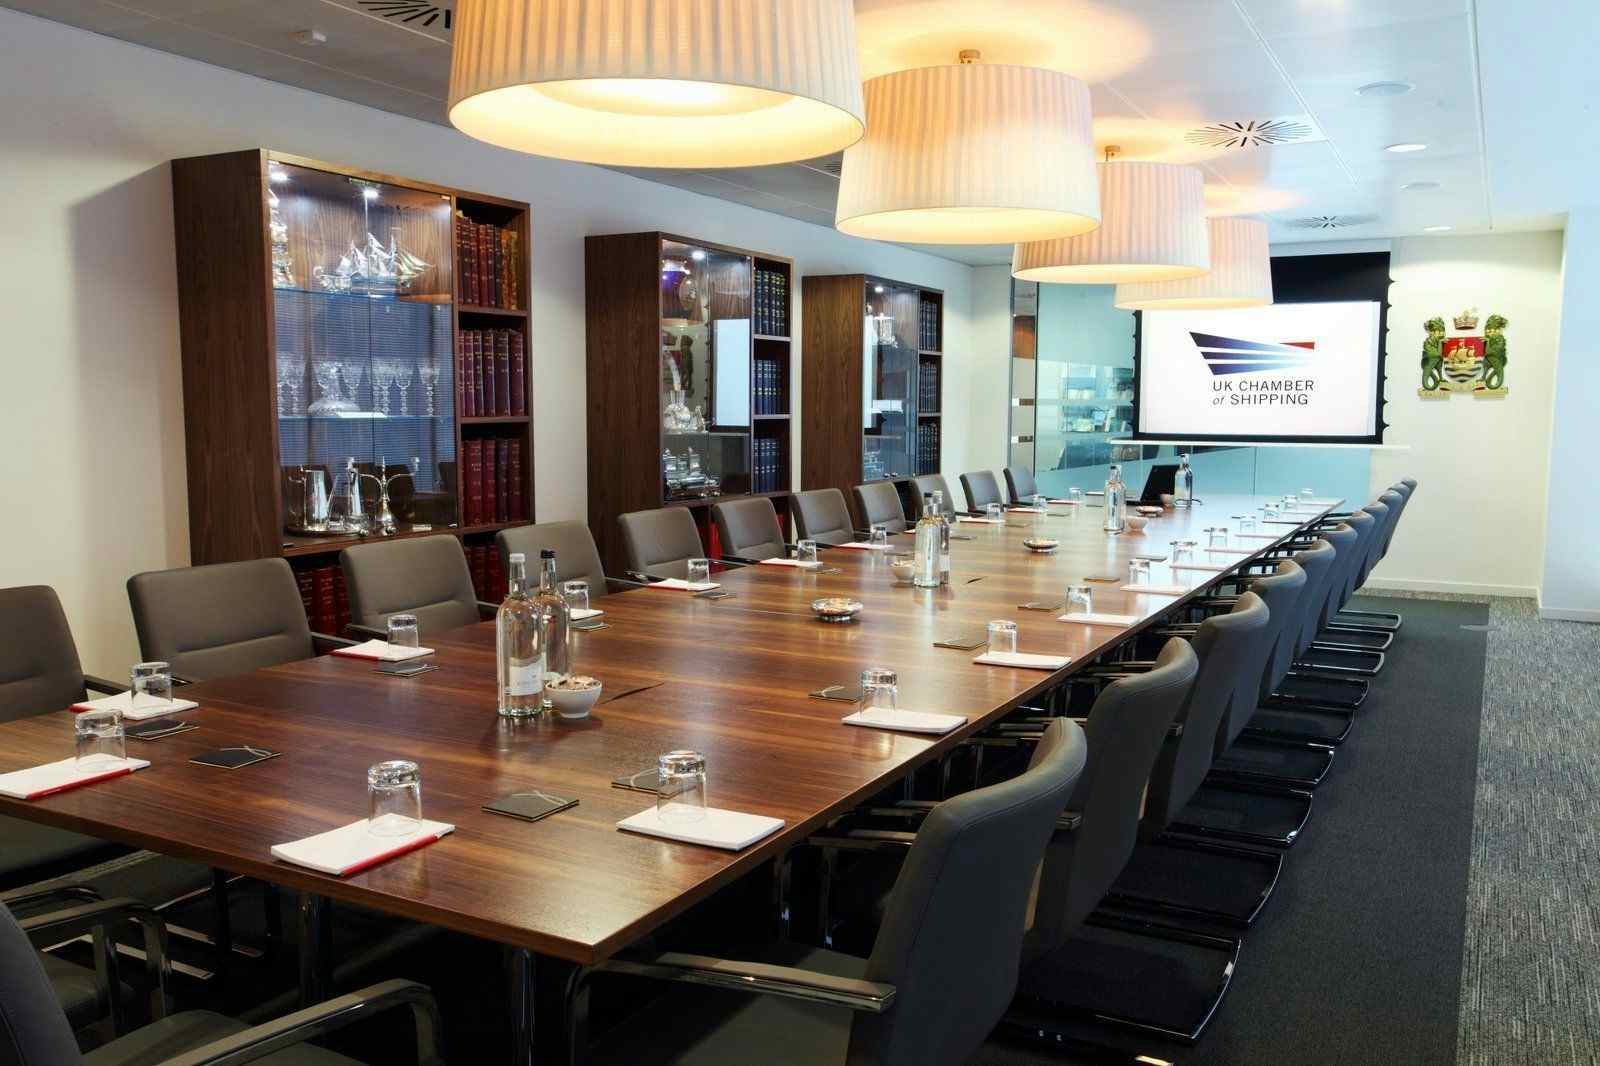 The Boardroom, UK Chamber of Shipping